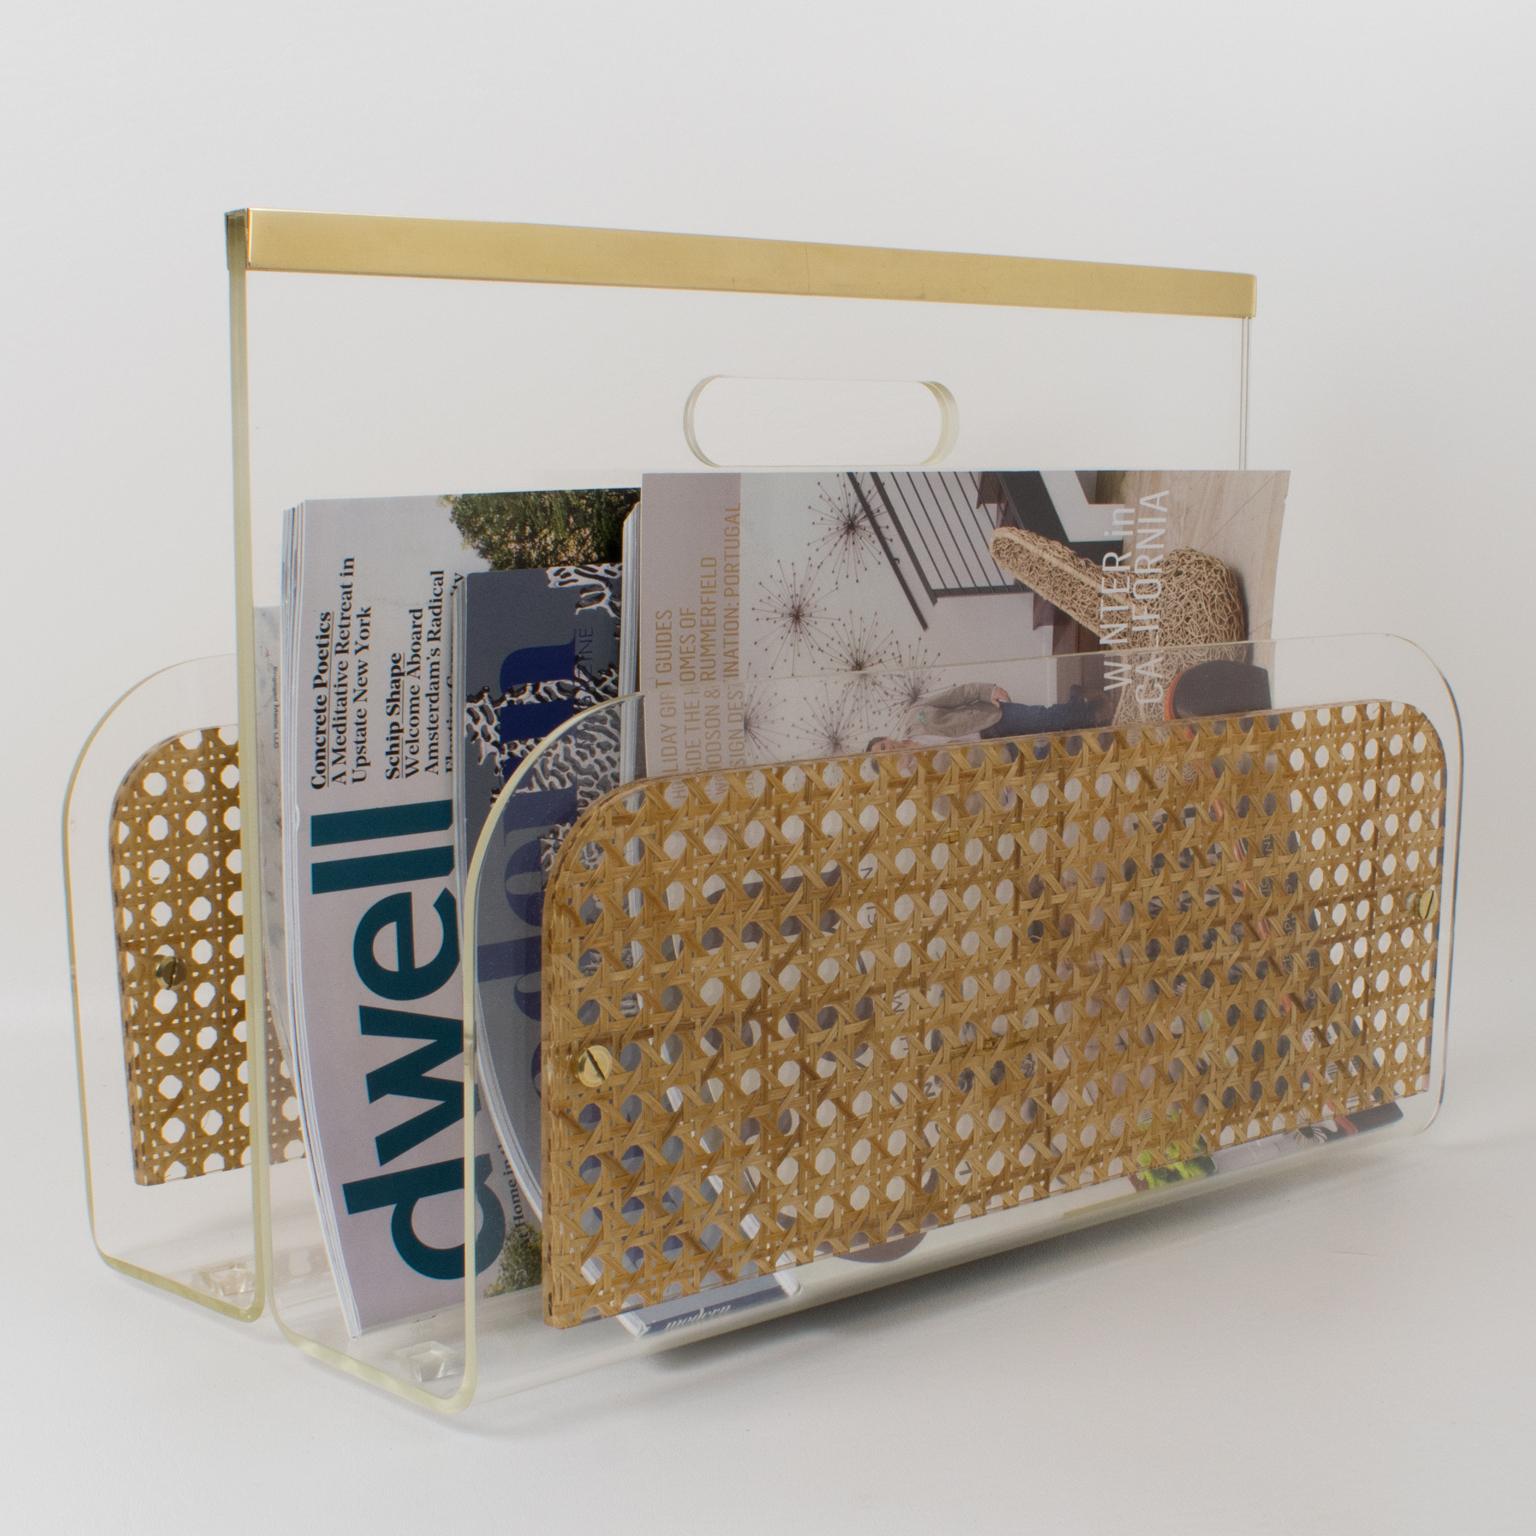 Stunning modernist magazine rack, holder, stand designed for Christian Dior Home Collection in the 1970s. Geometric shape with brass gallery, clear Lucite, and real rattan cane-work panels embedded in Lucite. Great accessory for any modern